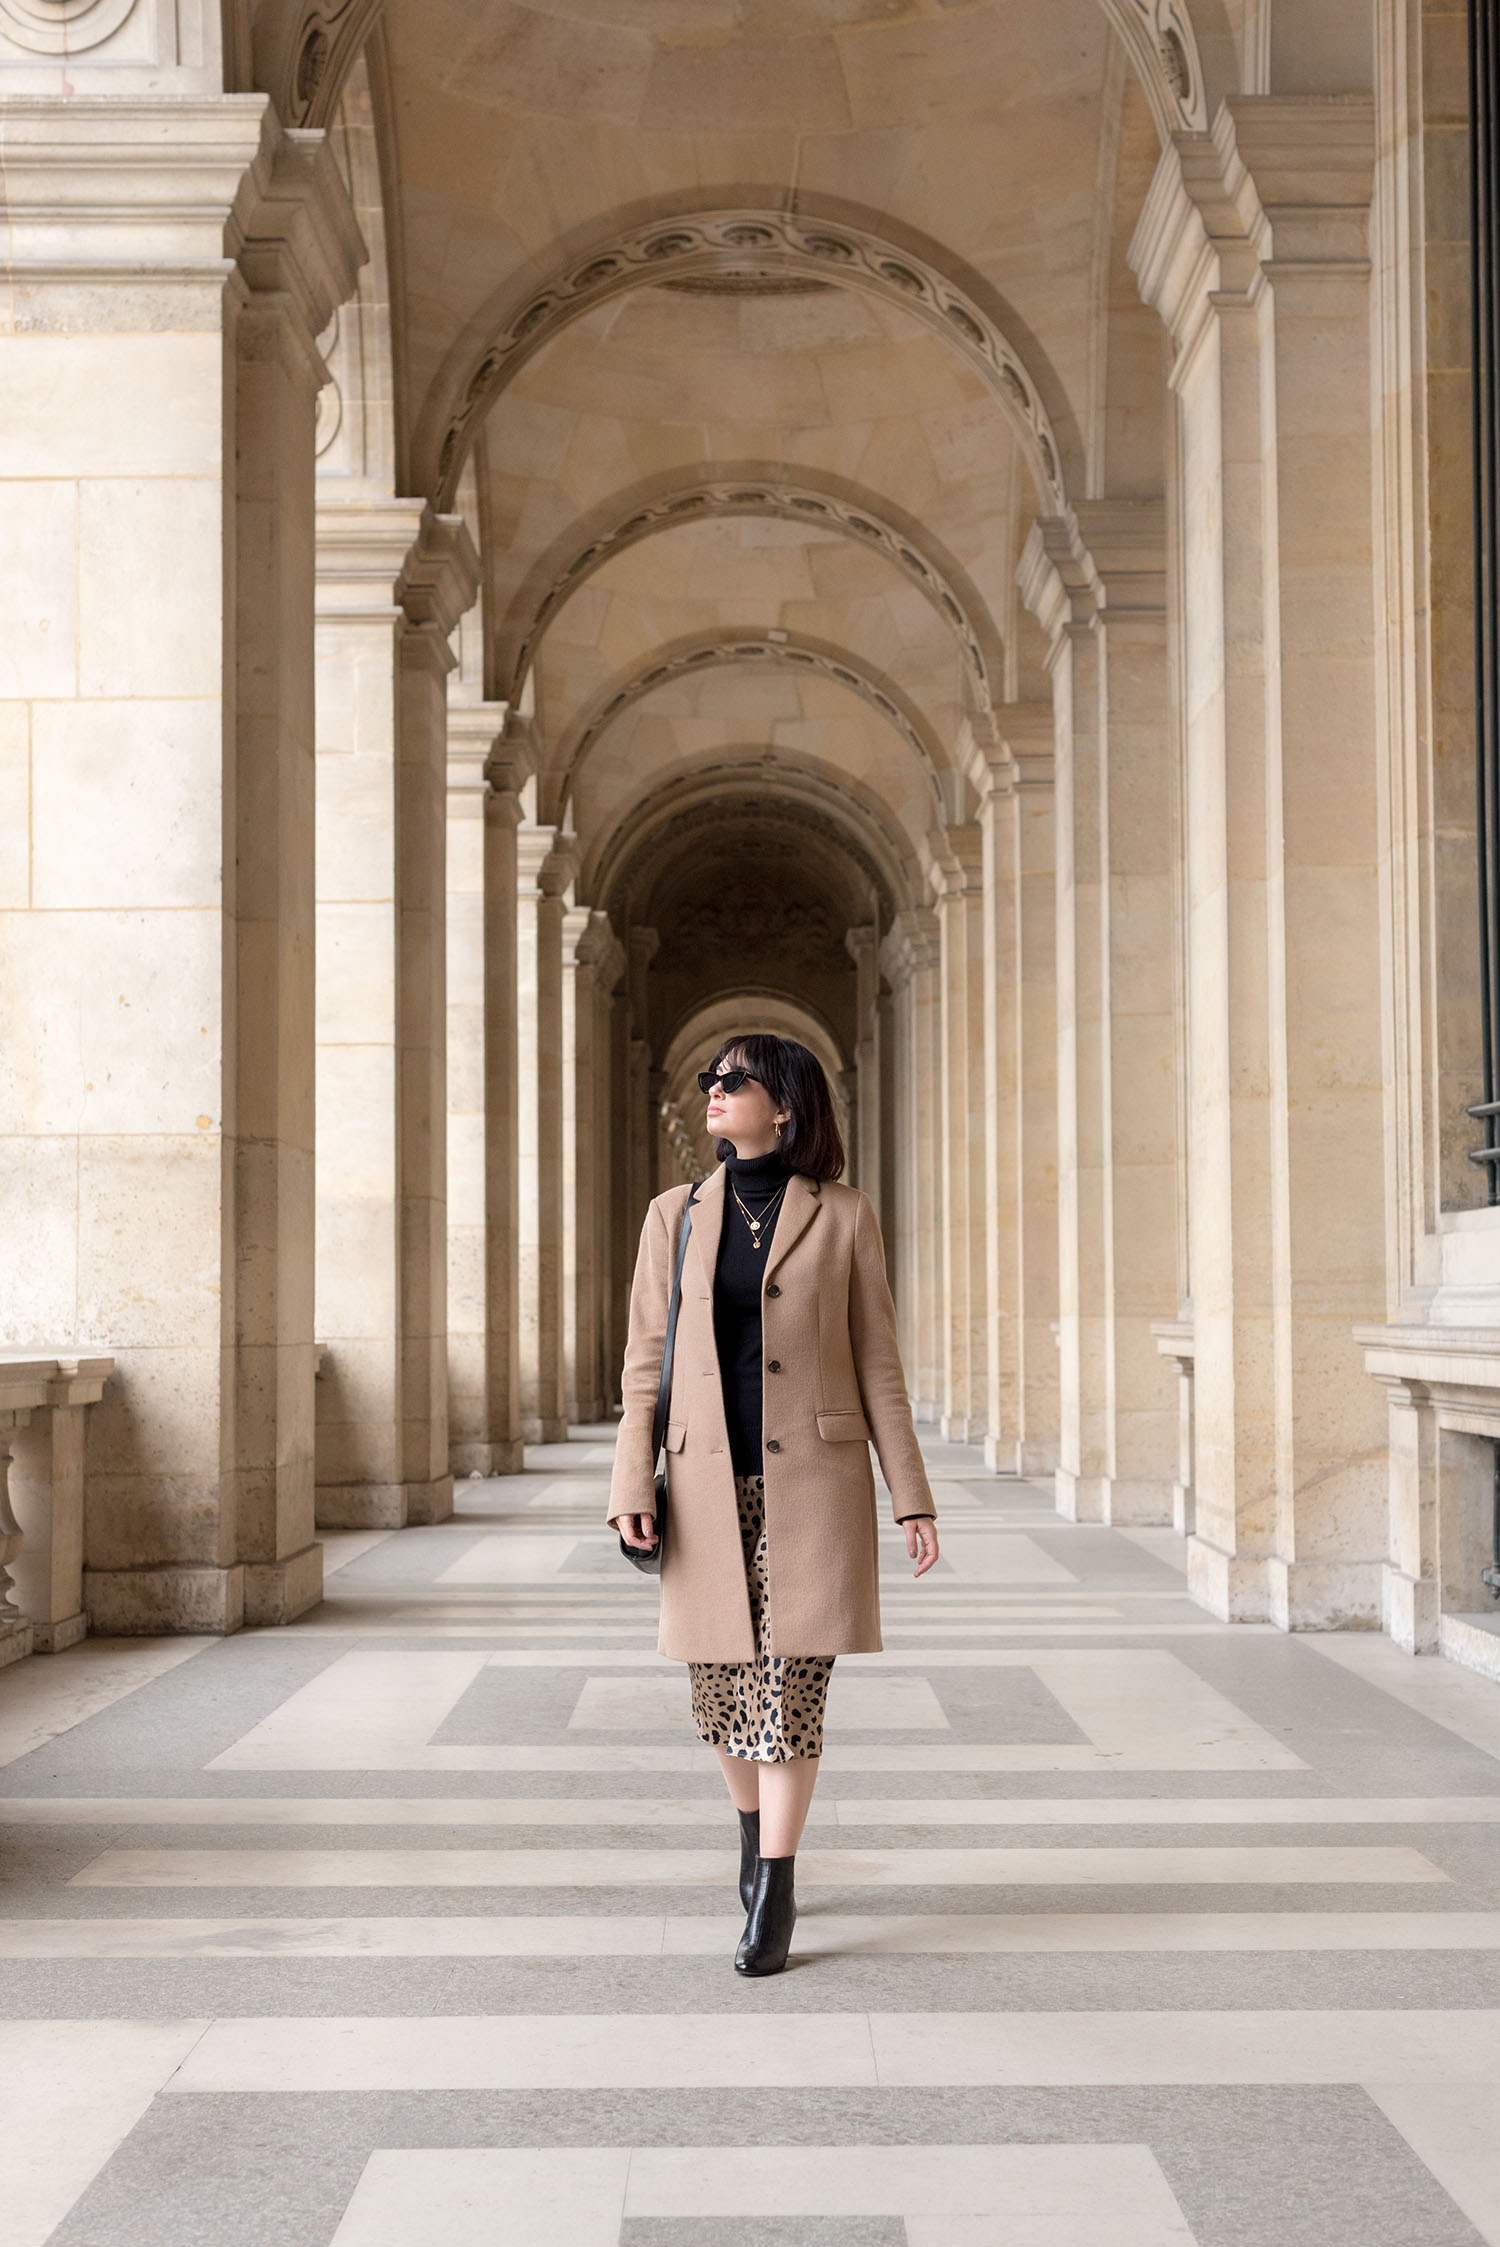 Top Winnipeg fashion blogger Cee Fardoe of Coco & Vera walks at the Louvre in Paris, wearing a Realisation Par... Naomi skirt and Uniqlo camel coat